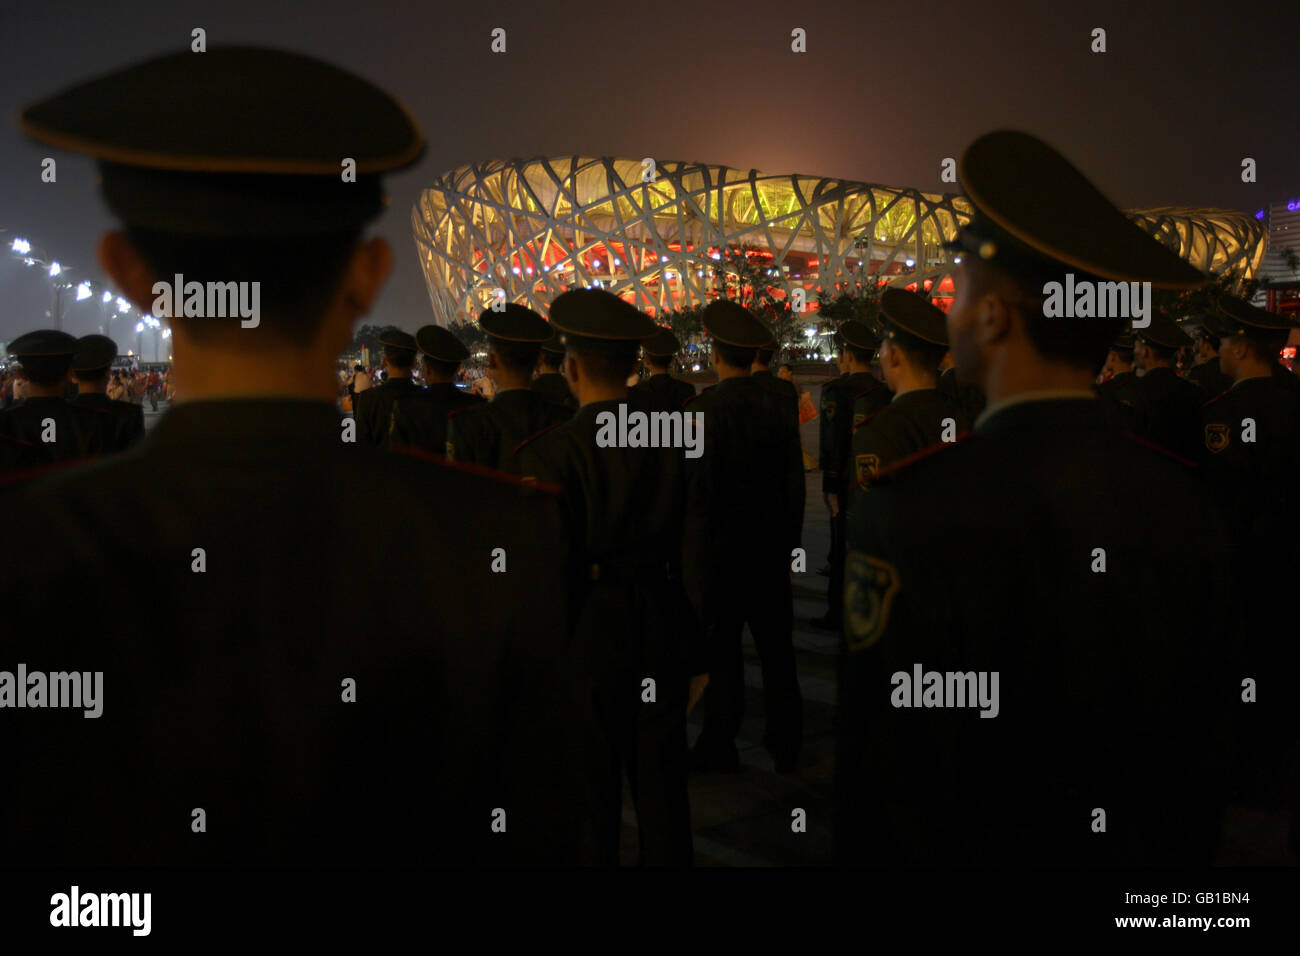 The Beijing National Stadium is watched over by some guards during the Beijing Olympic Games 2008 Opening Ceremony at the National Stadium in Beijing, China. Stock Photo